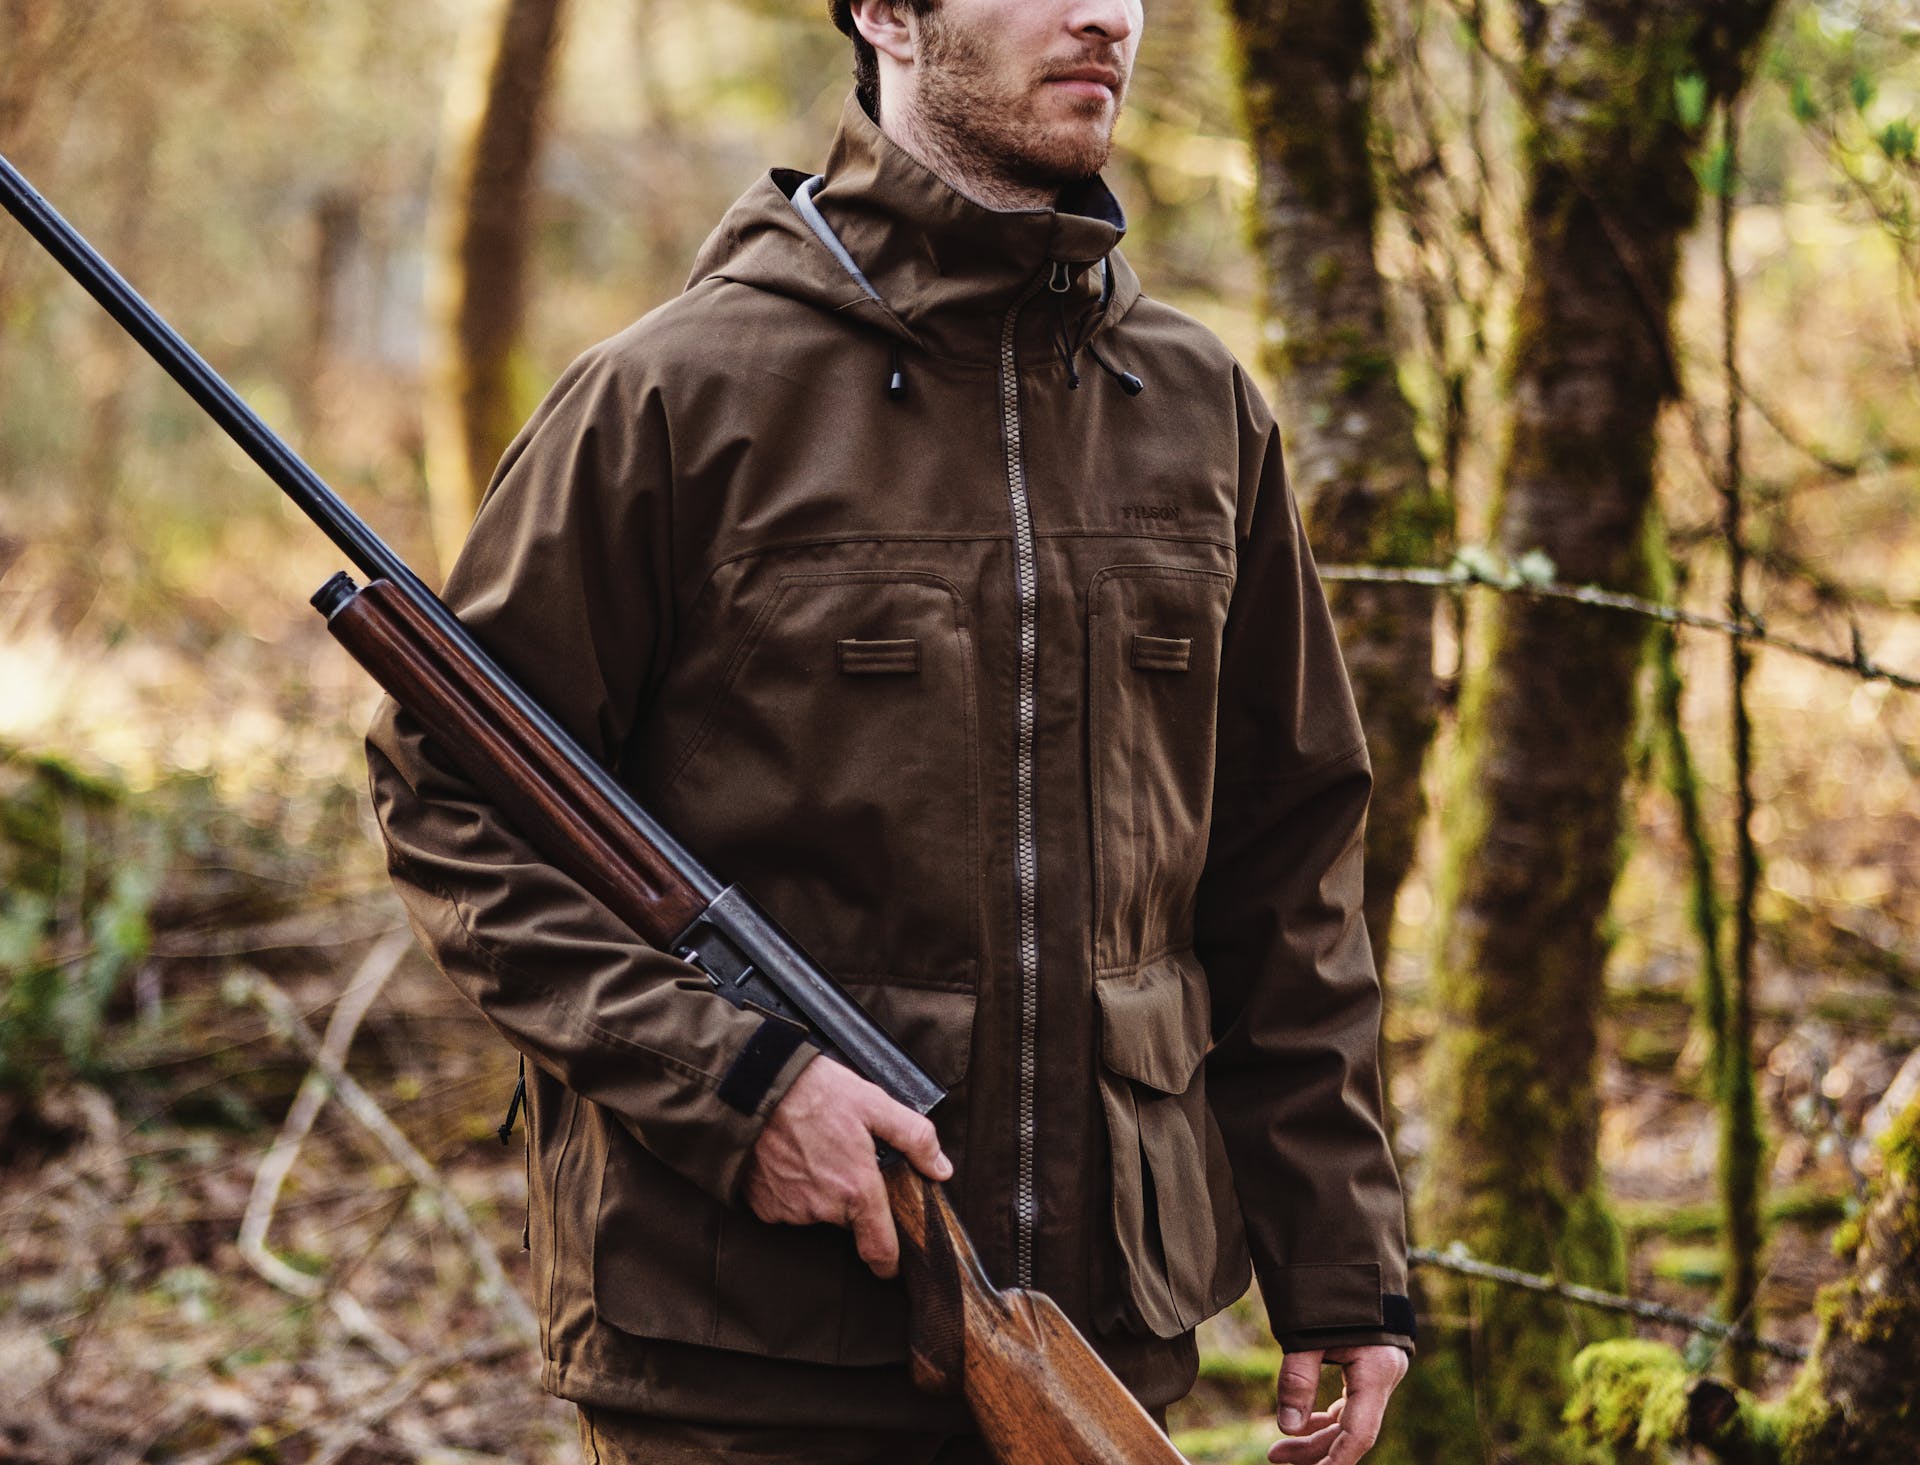 Hunter holding a rifle in the woods wearing a Filson 3-Layer Field Jacket